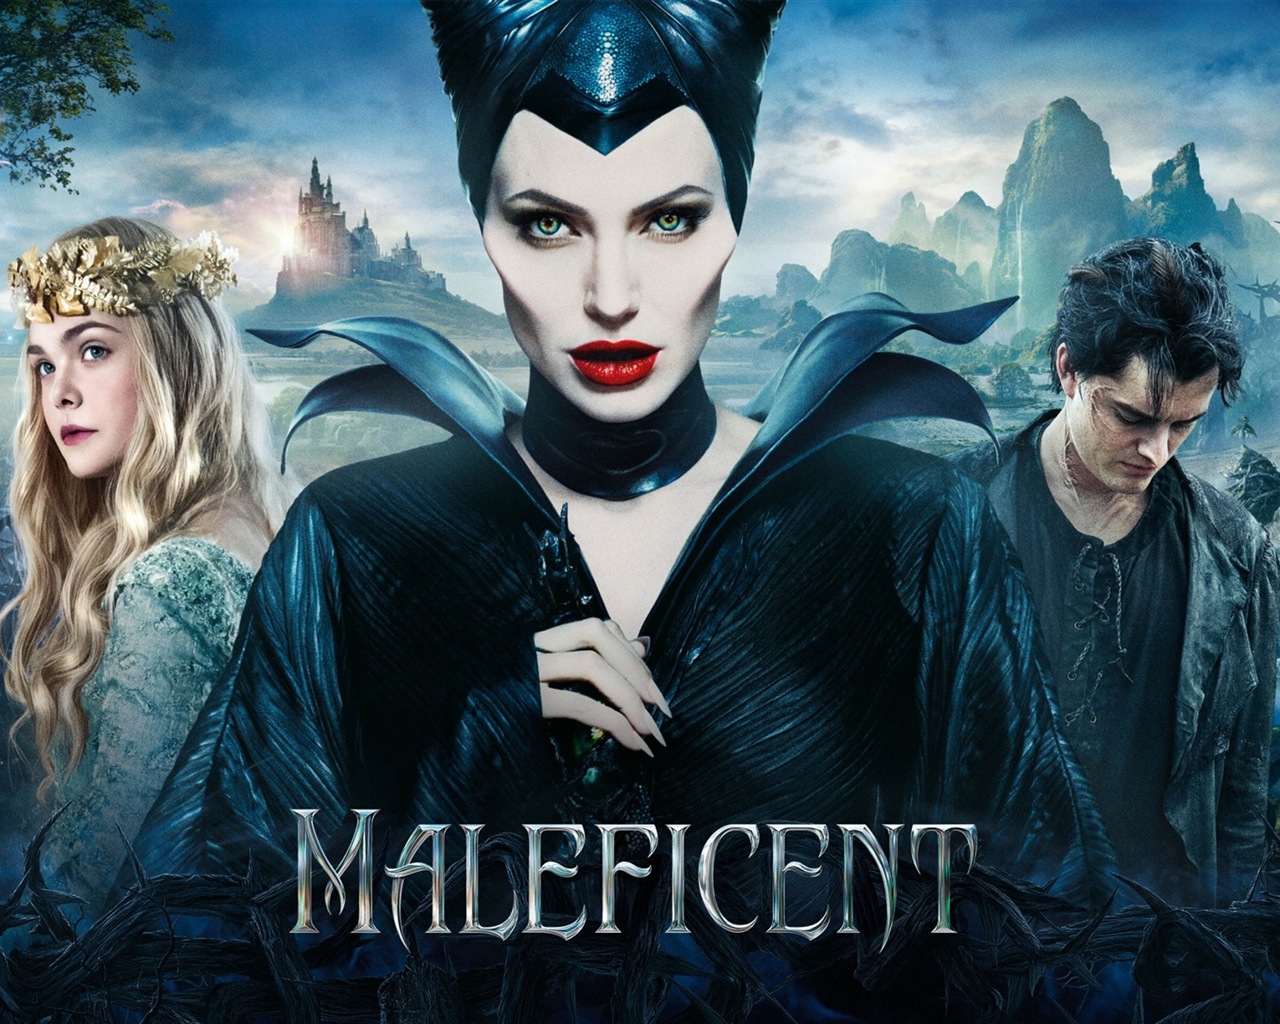 Maleficent 2014 HD movie wallpapers #1 - 1280x1024